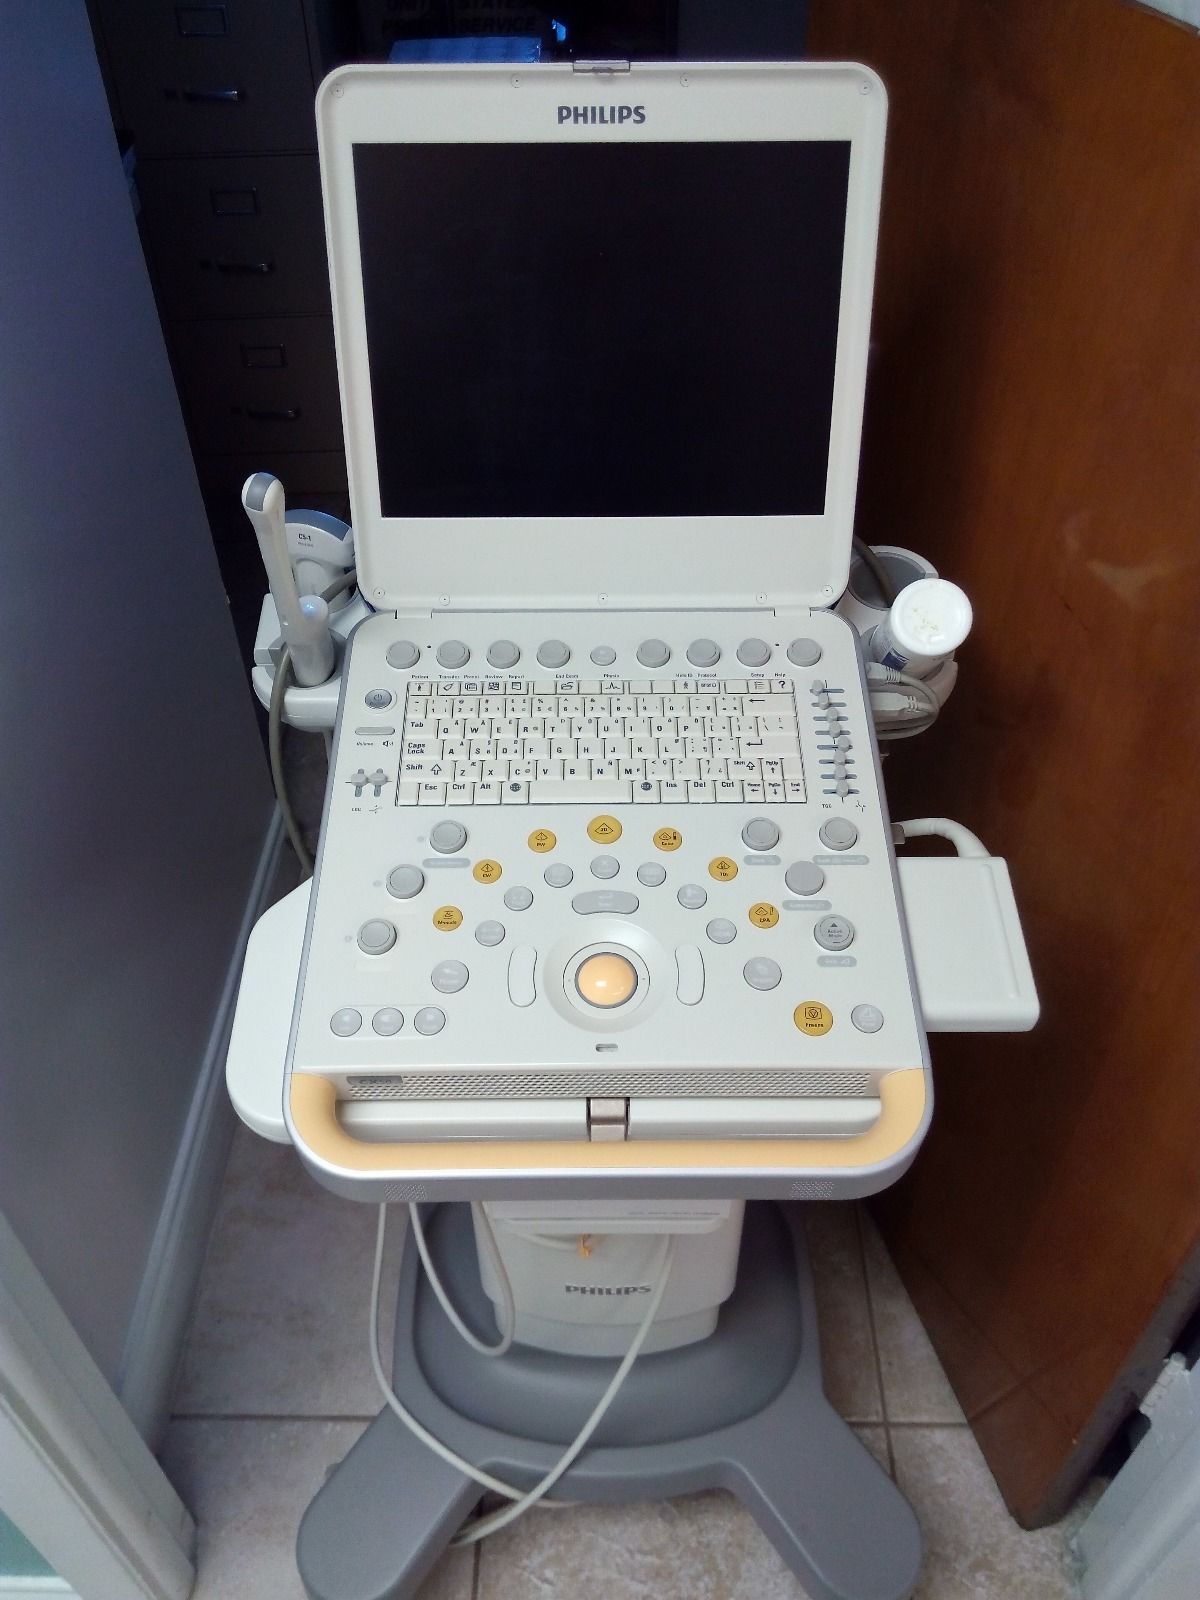 Philips CX50 Portable General Imaging Ultrasound Machine